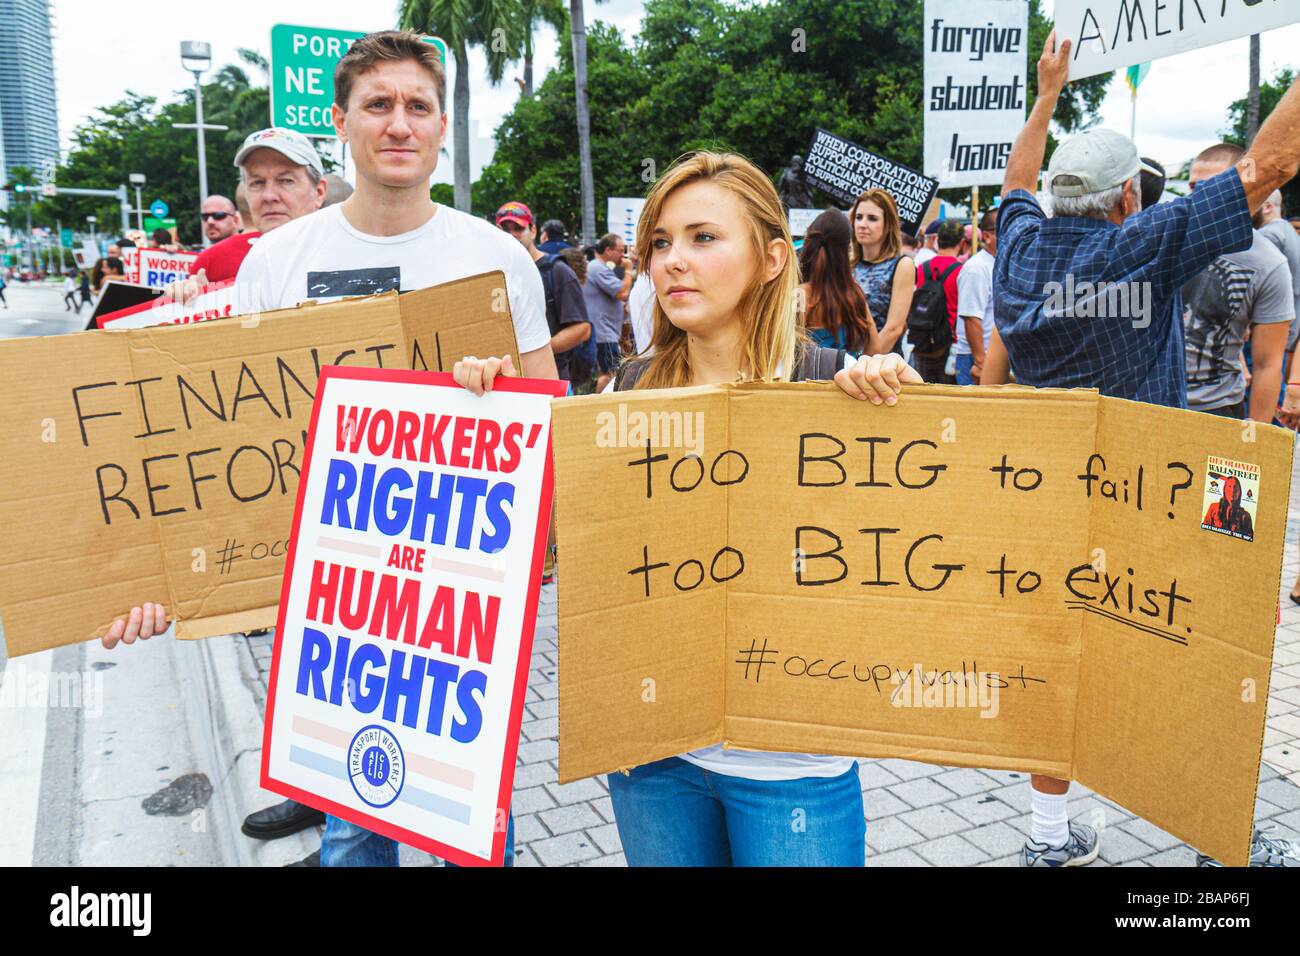 Miami Florida,Biscayne Boulevard,Freedom Torch,Occupy Miami,demonstration,protest,protesters,anti Wall Street,banks,corporate greed,sign,poster,messag Stock Photo